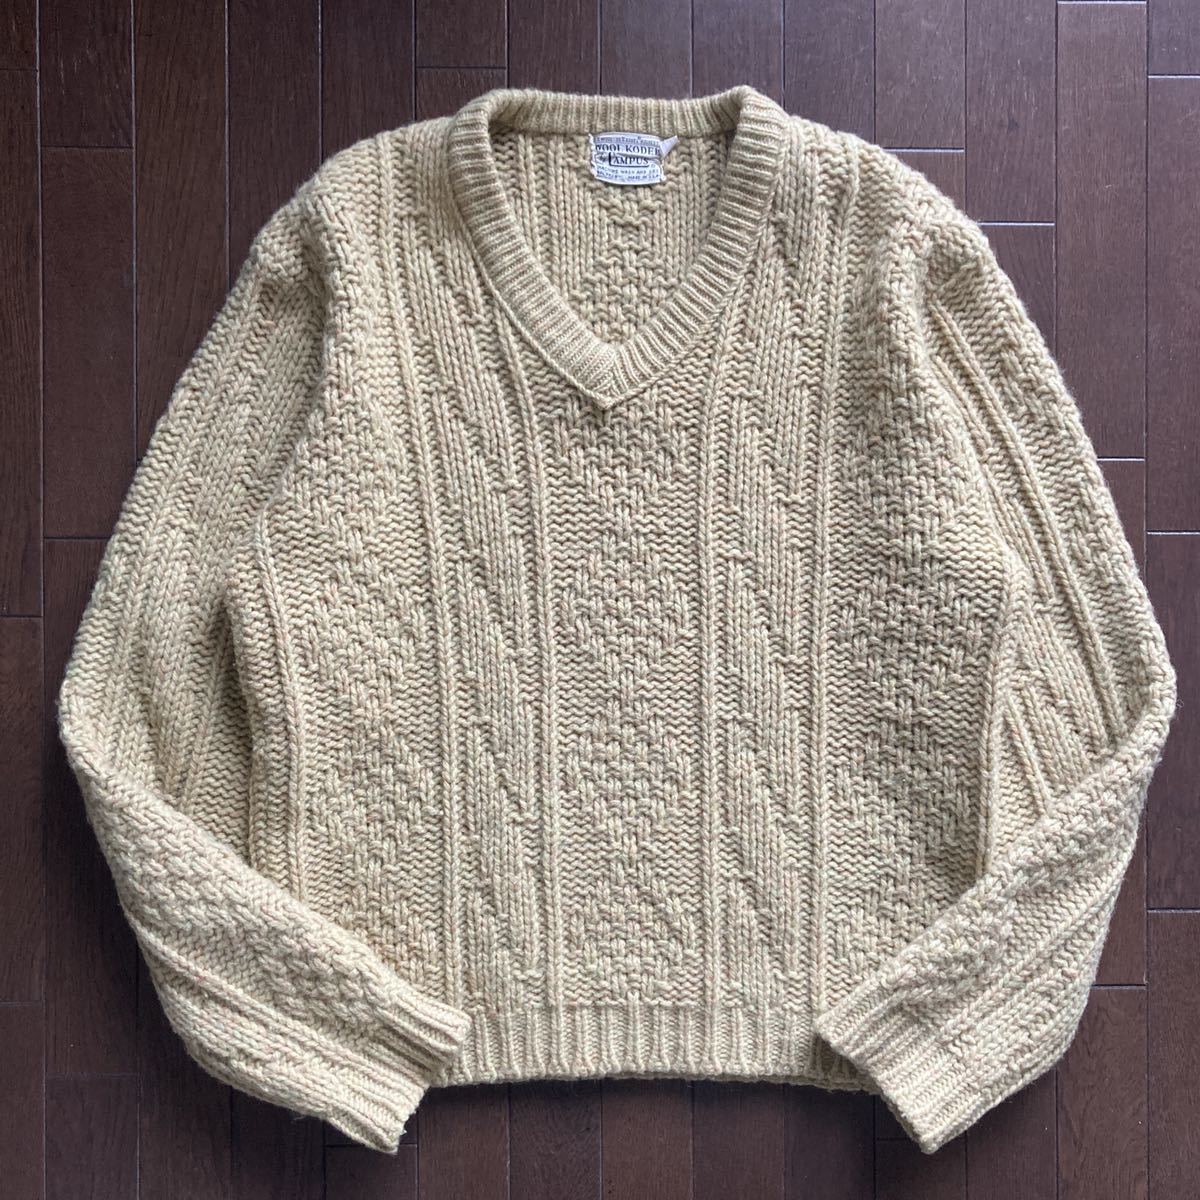 60s Vintage Wool Kodel by Campus キャンパス ウールセーター Vネック 70s 80s 90s アメリカ製 usa製